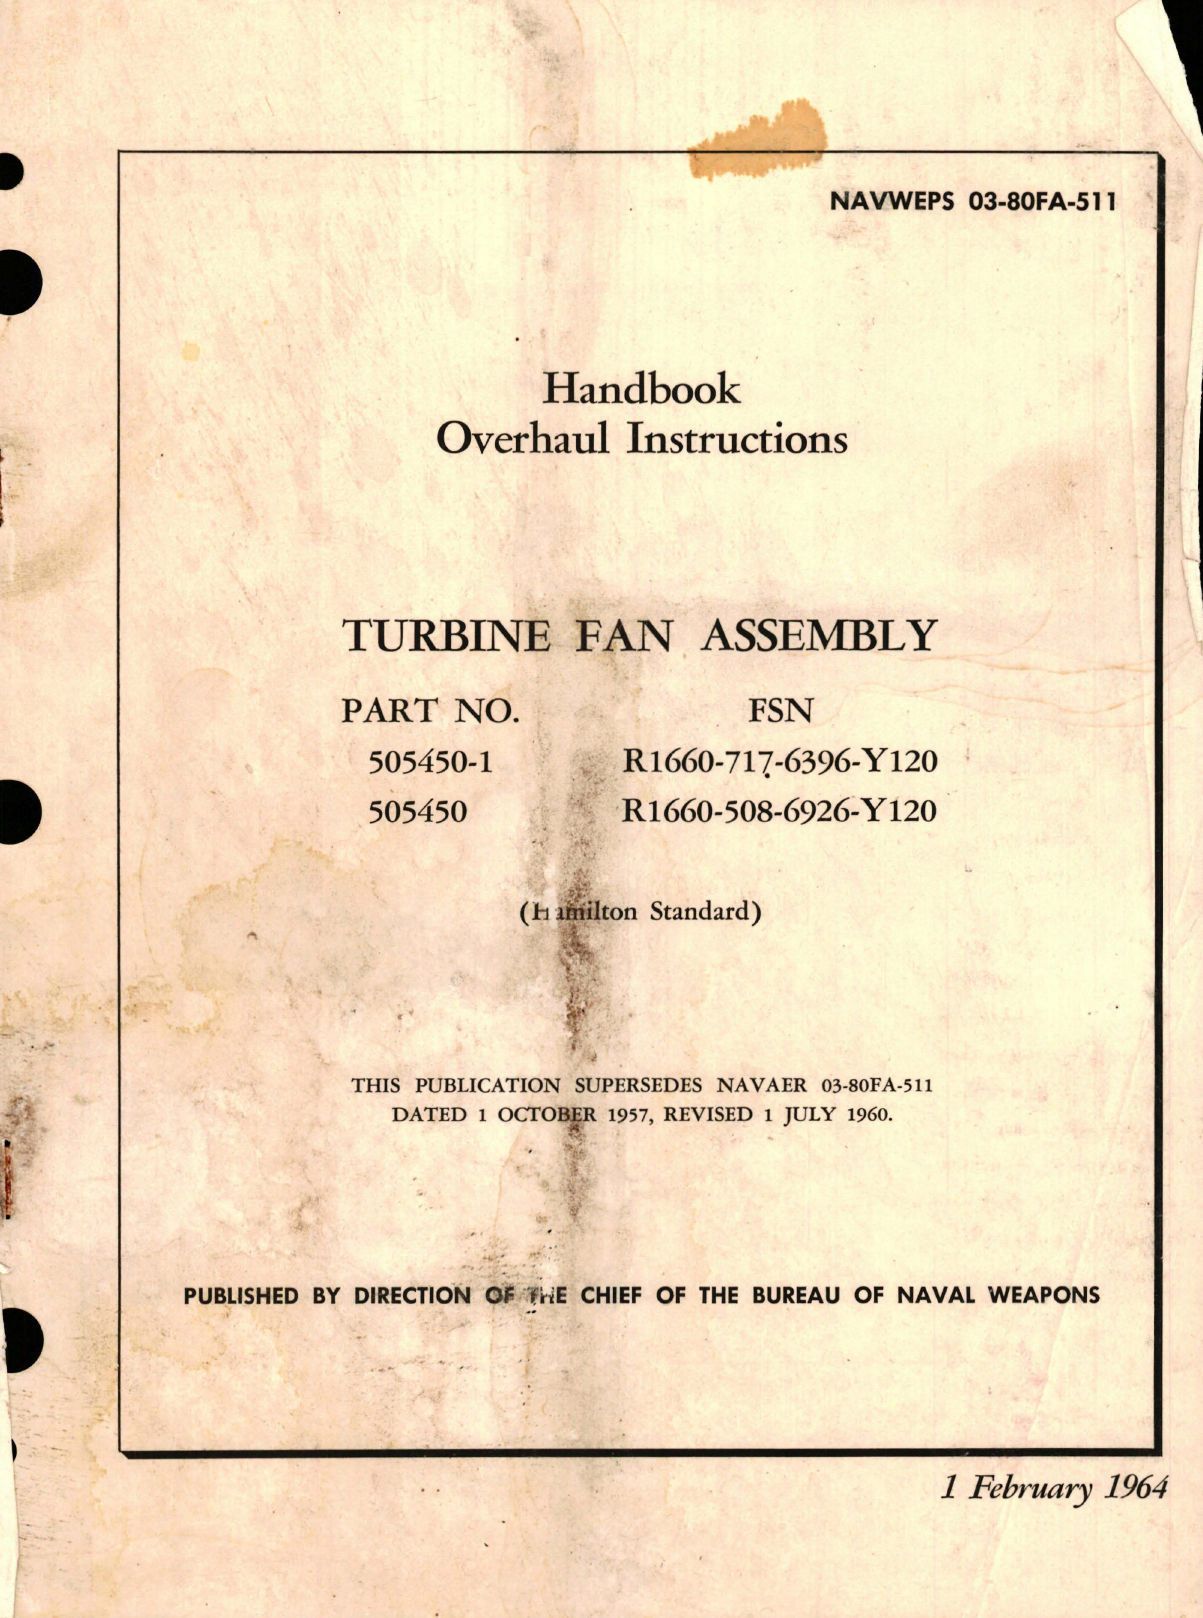 Sample page 1 from AirCorps Library document: Overhaul Instructions for Turbine Fan Assembly - Parts 505450-1 and 505450 